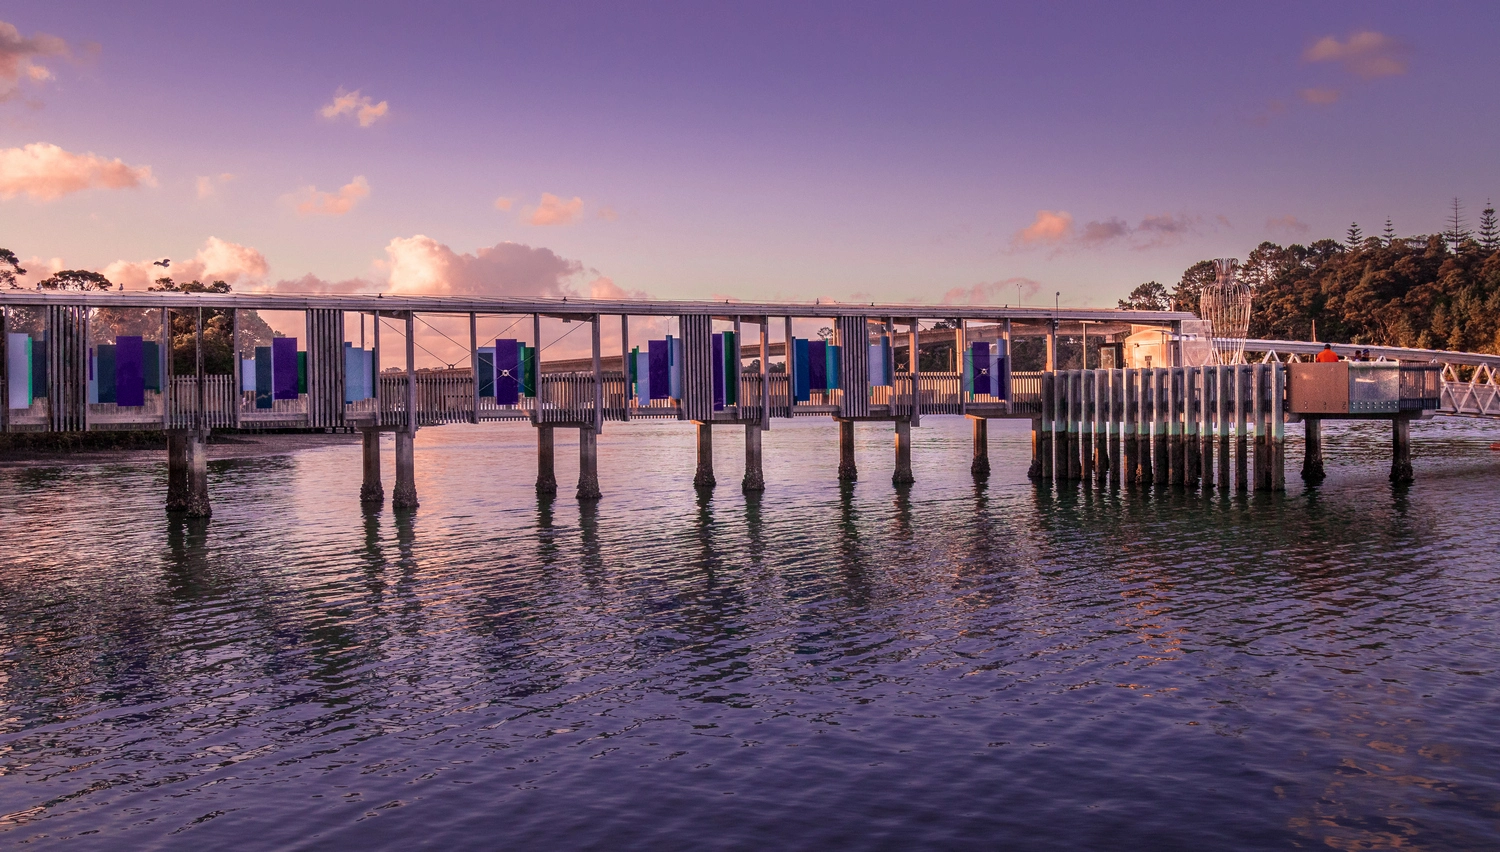 Wharf at Hobsonville Point near sunset